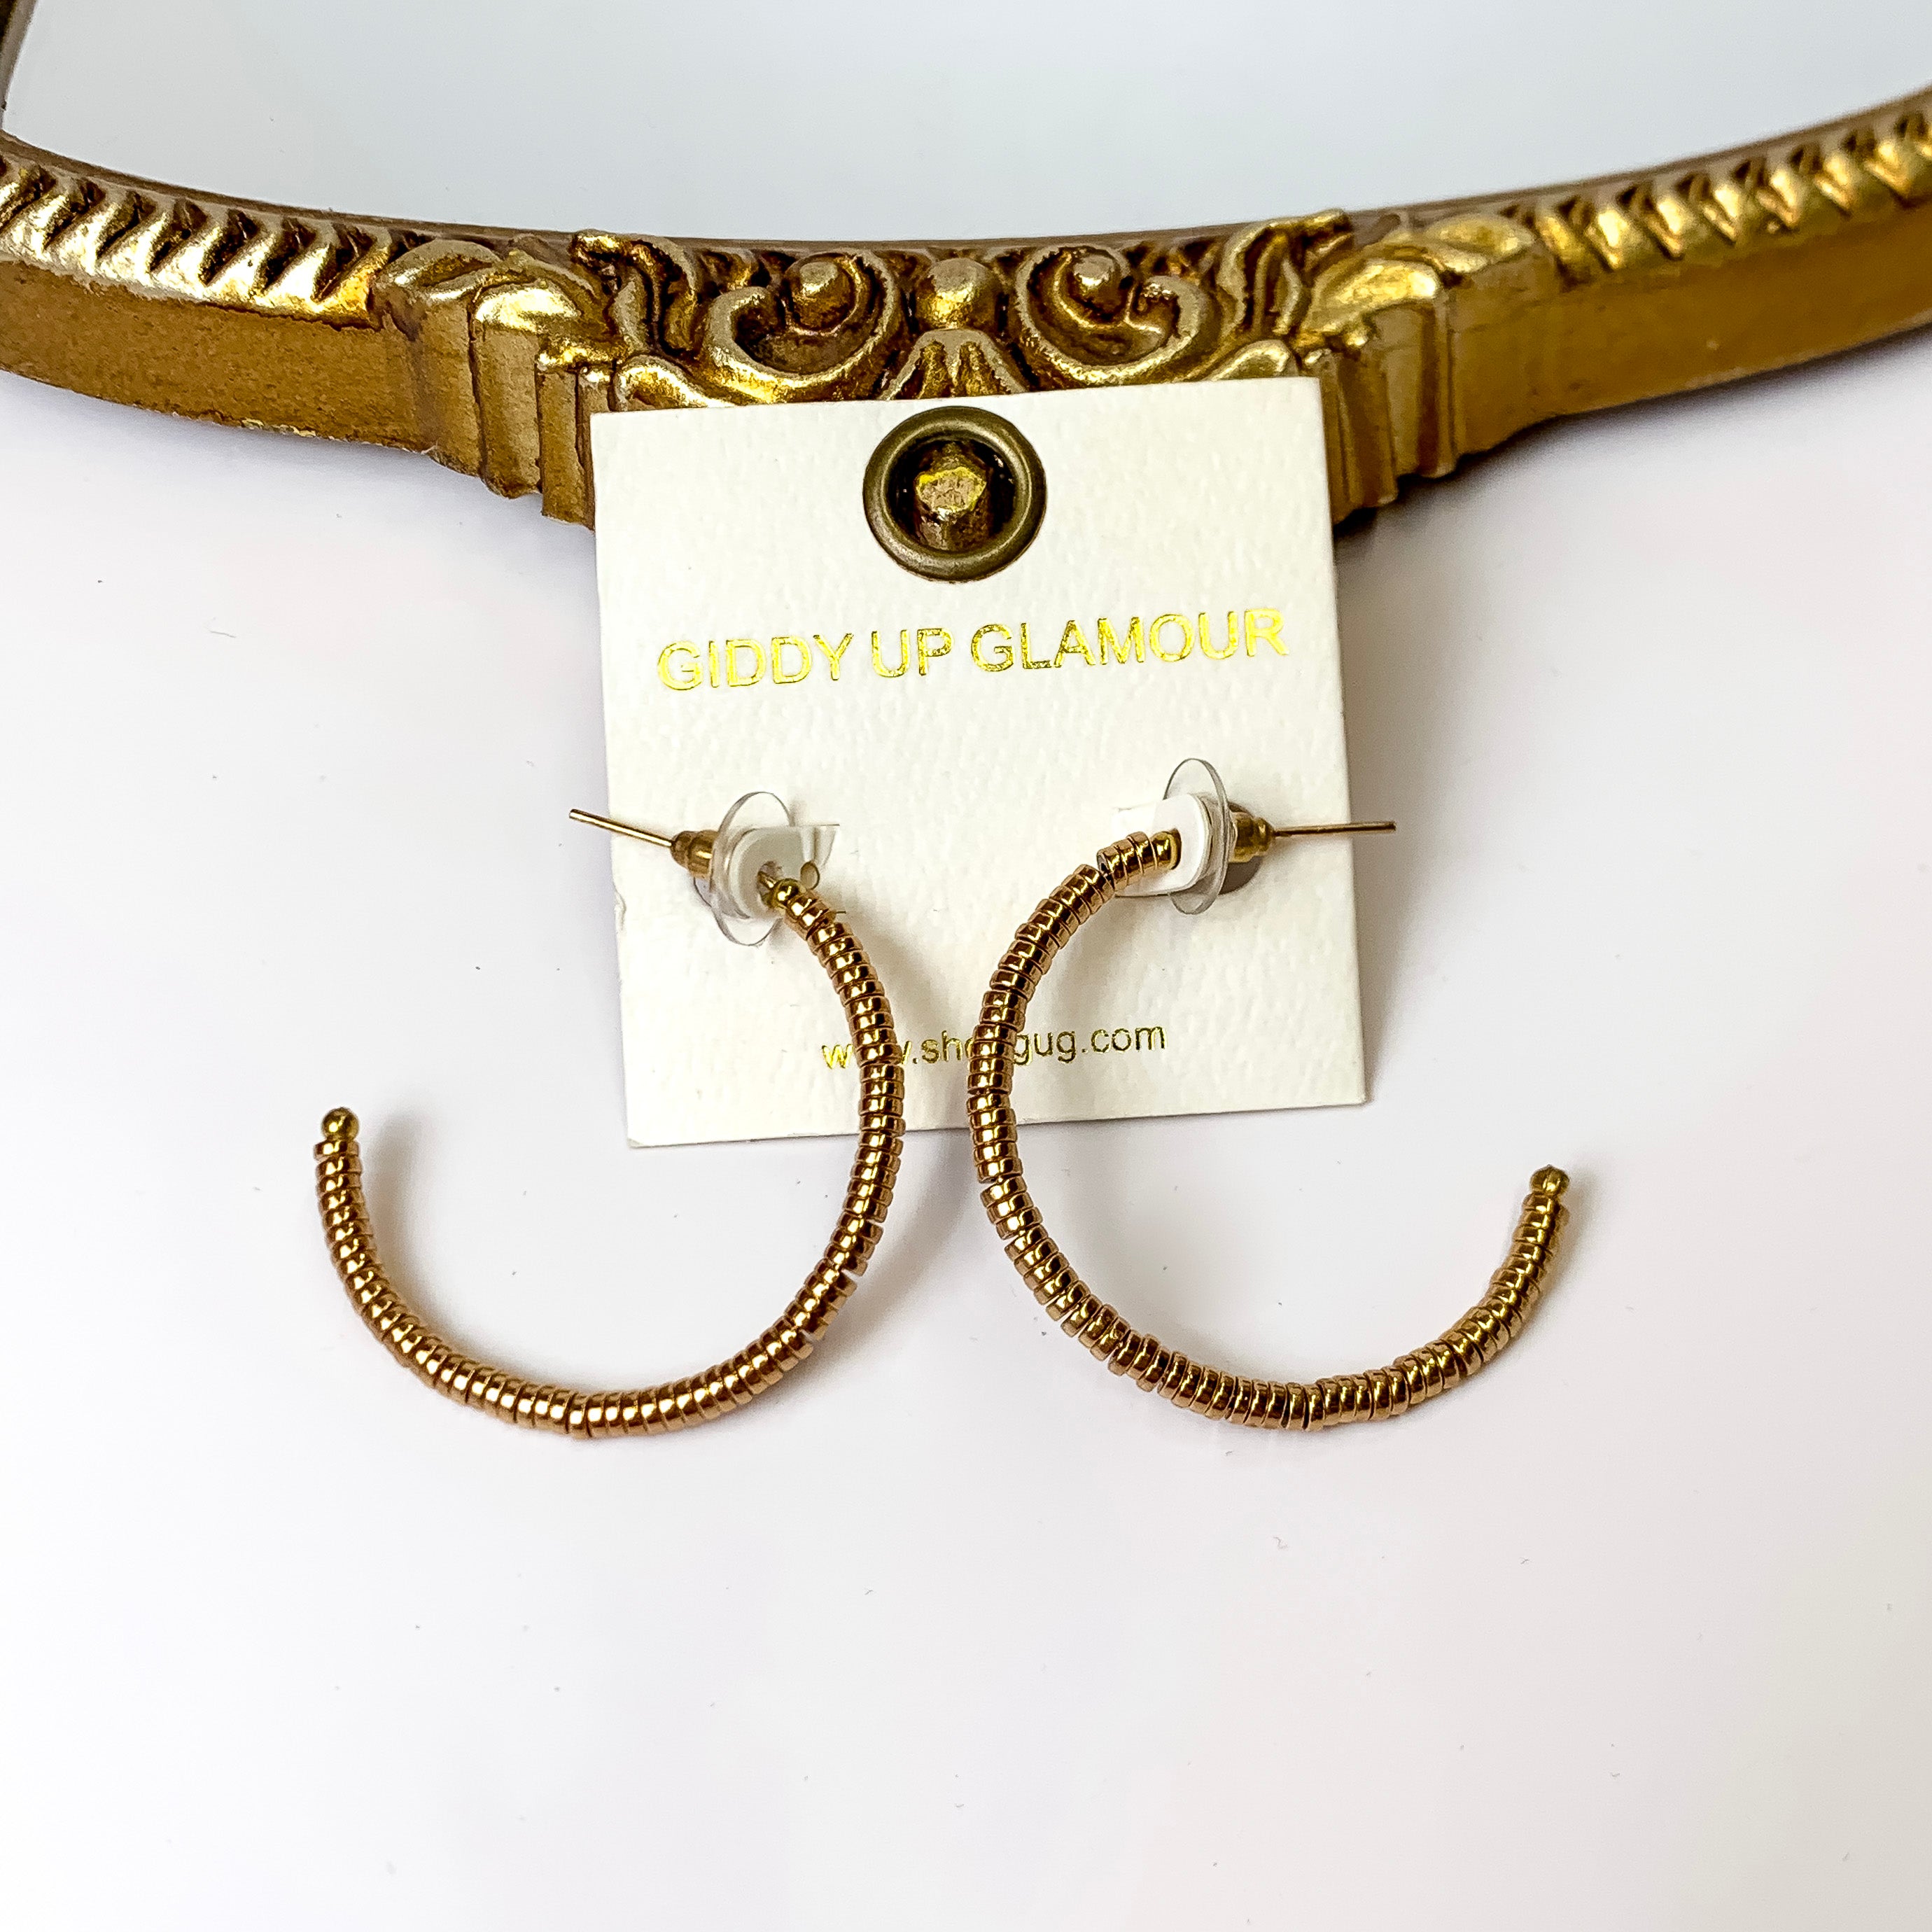 Metal Disk Beaded Hoop Earrings in Gold - Giddy Up Glamour Boutique